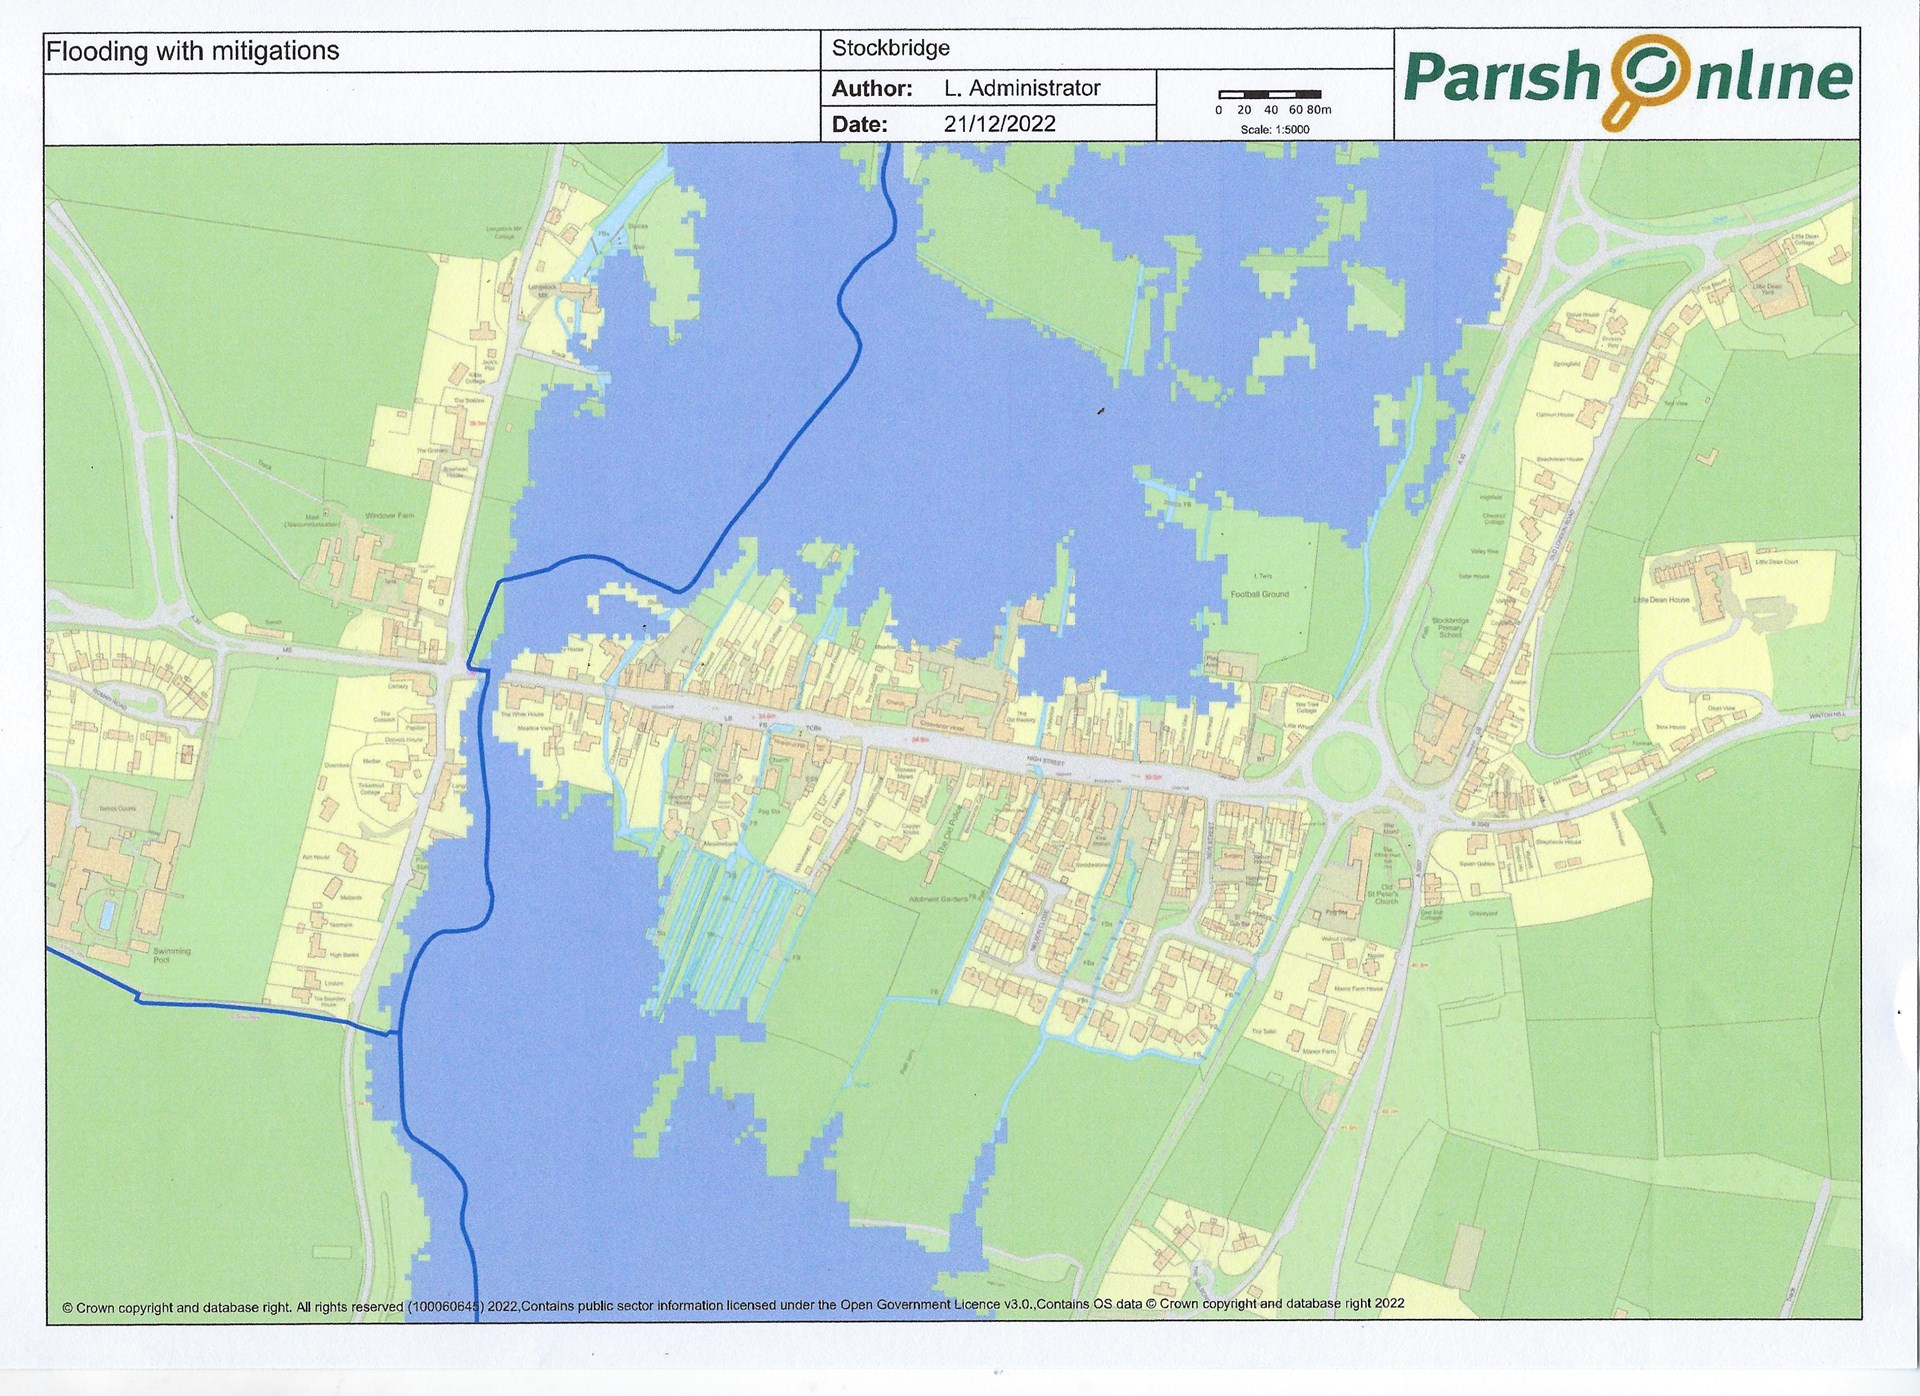 This map show the extent of flooding when the flood defences are taken into account.